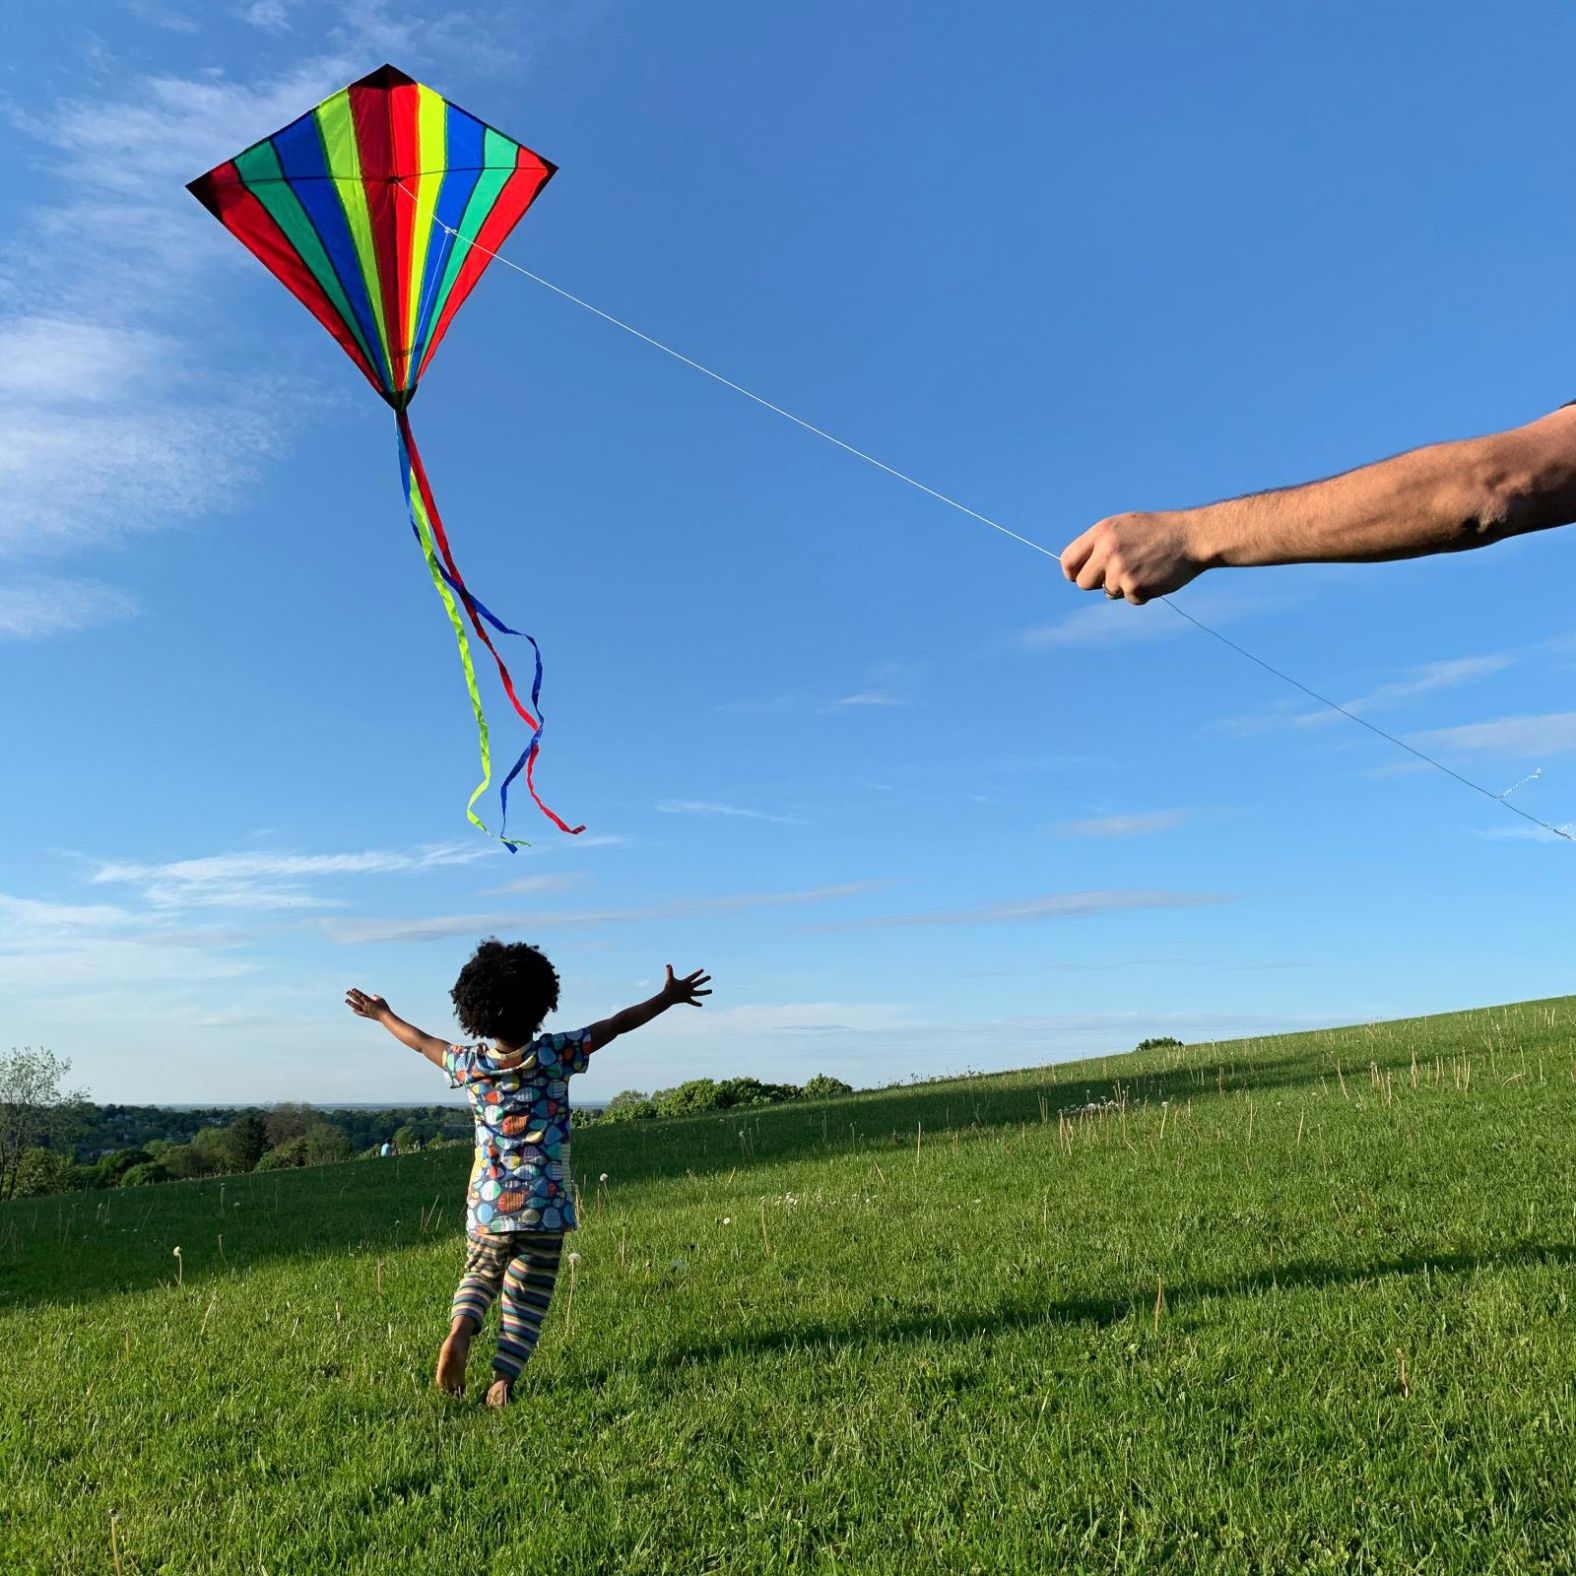 <a href="index.php?page=&url=http%3A%2F%2Fwww.amytoensing.com%2F" target="_blank" target="_blank">Amy Toensing</a> photographed her daughter,  Elsa, chasing a kite flown by her husband. "We were fortunate enough to become a family through adoption," she said. "Being a mom challenges, fulfills and humbles me every day. My daughter has opened my world and makes me want to know more about myself so I can be more present with her. She is the love of my life."